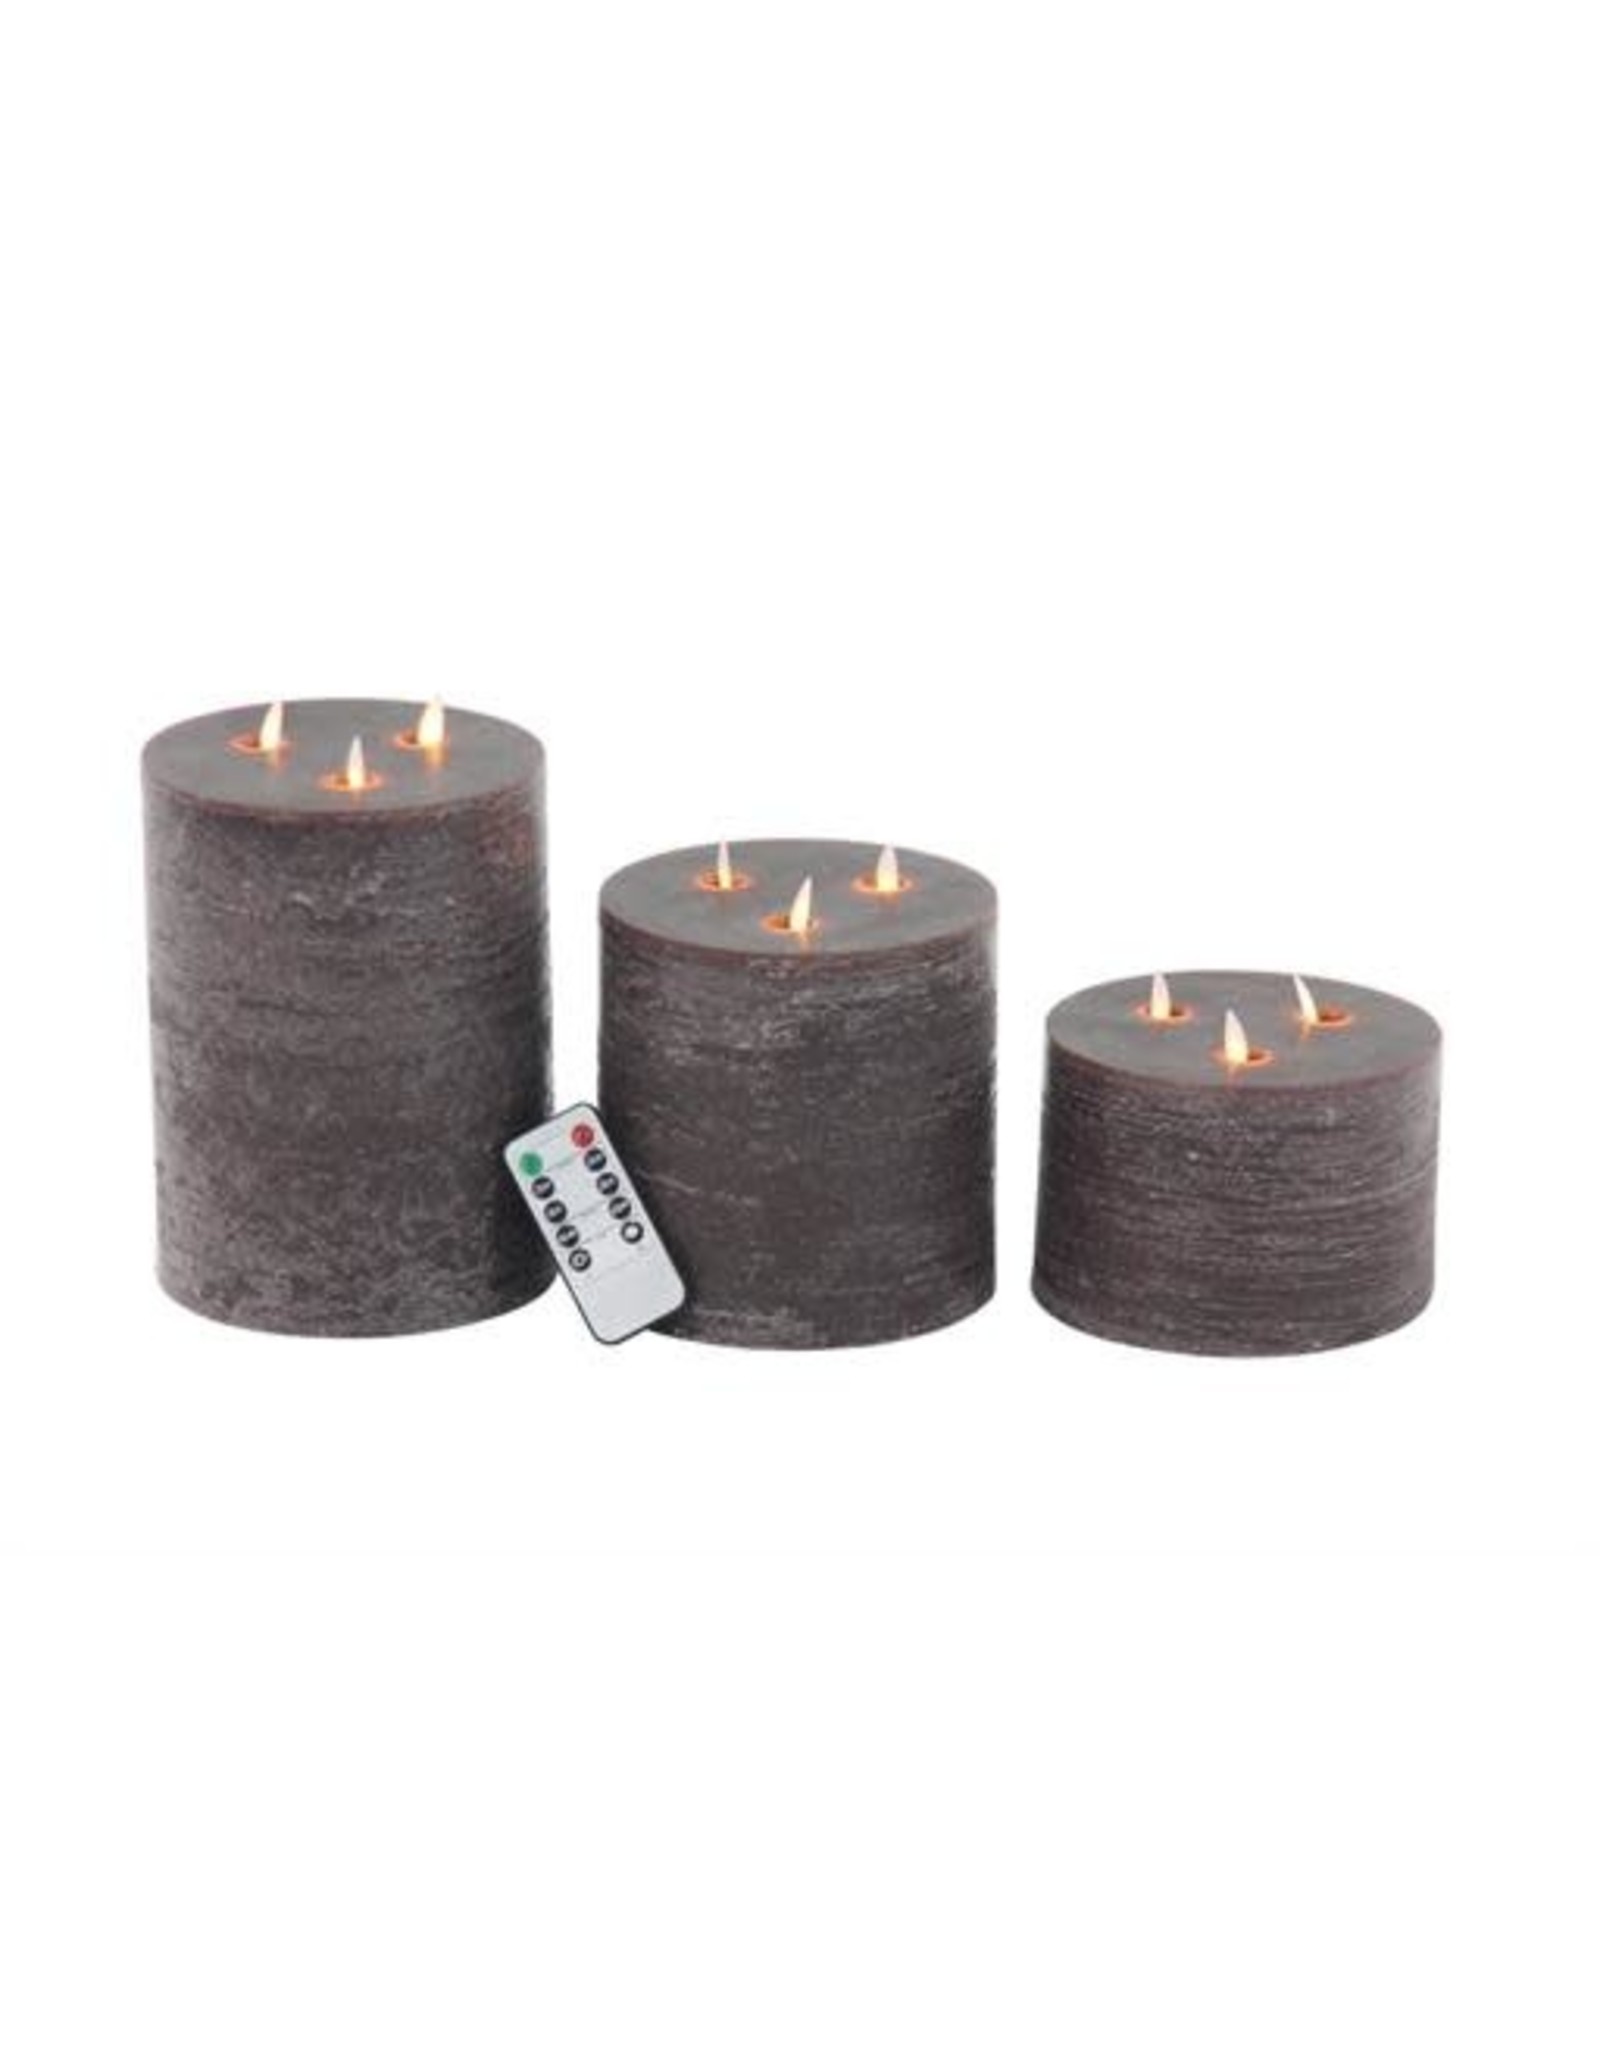 73171 led Flicker Candle 3 sizes one remote